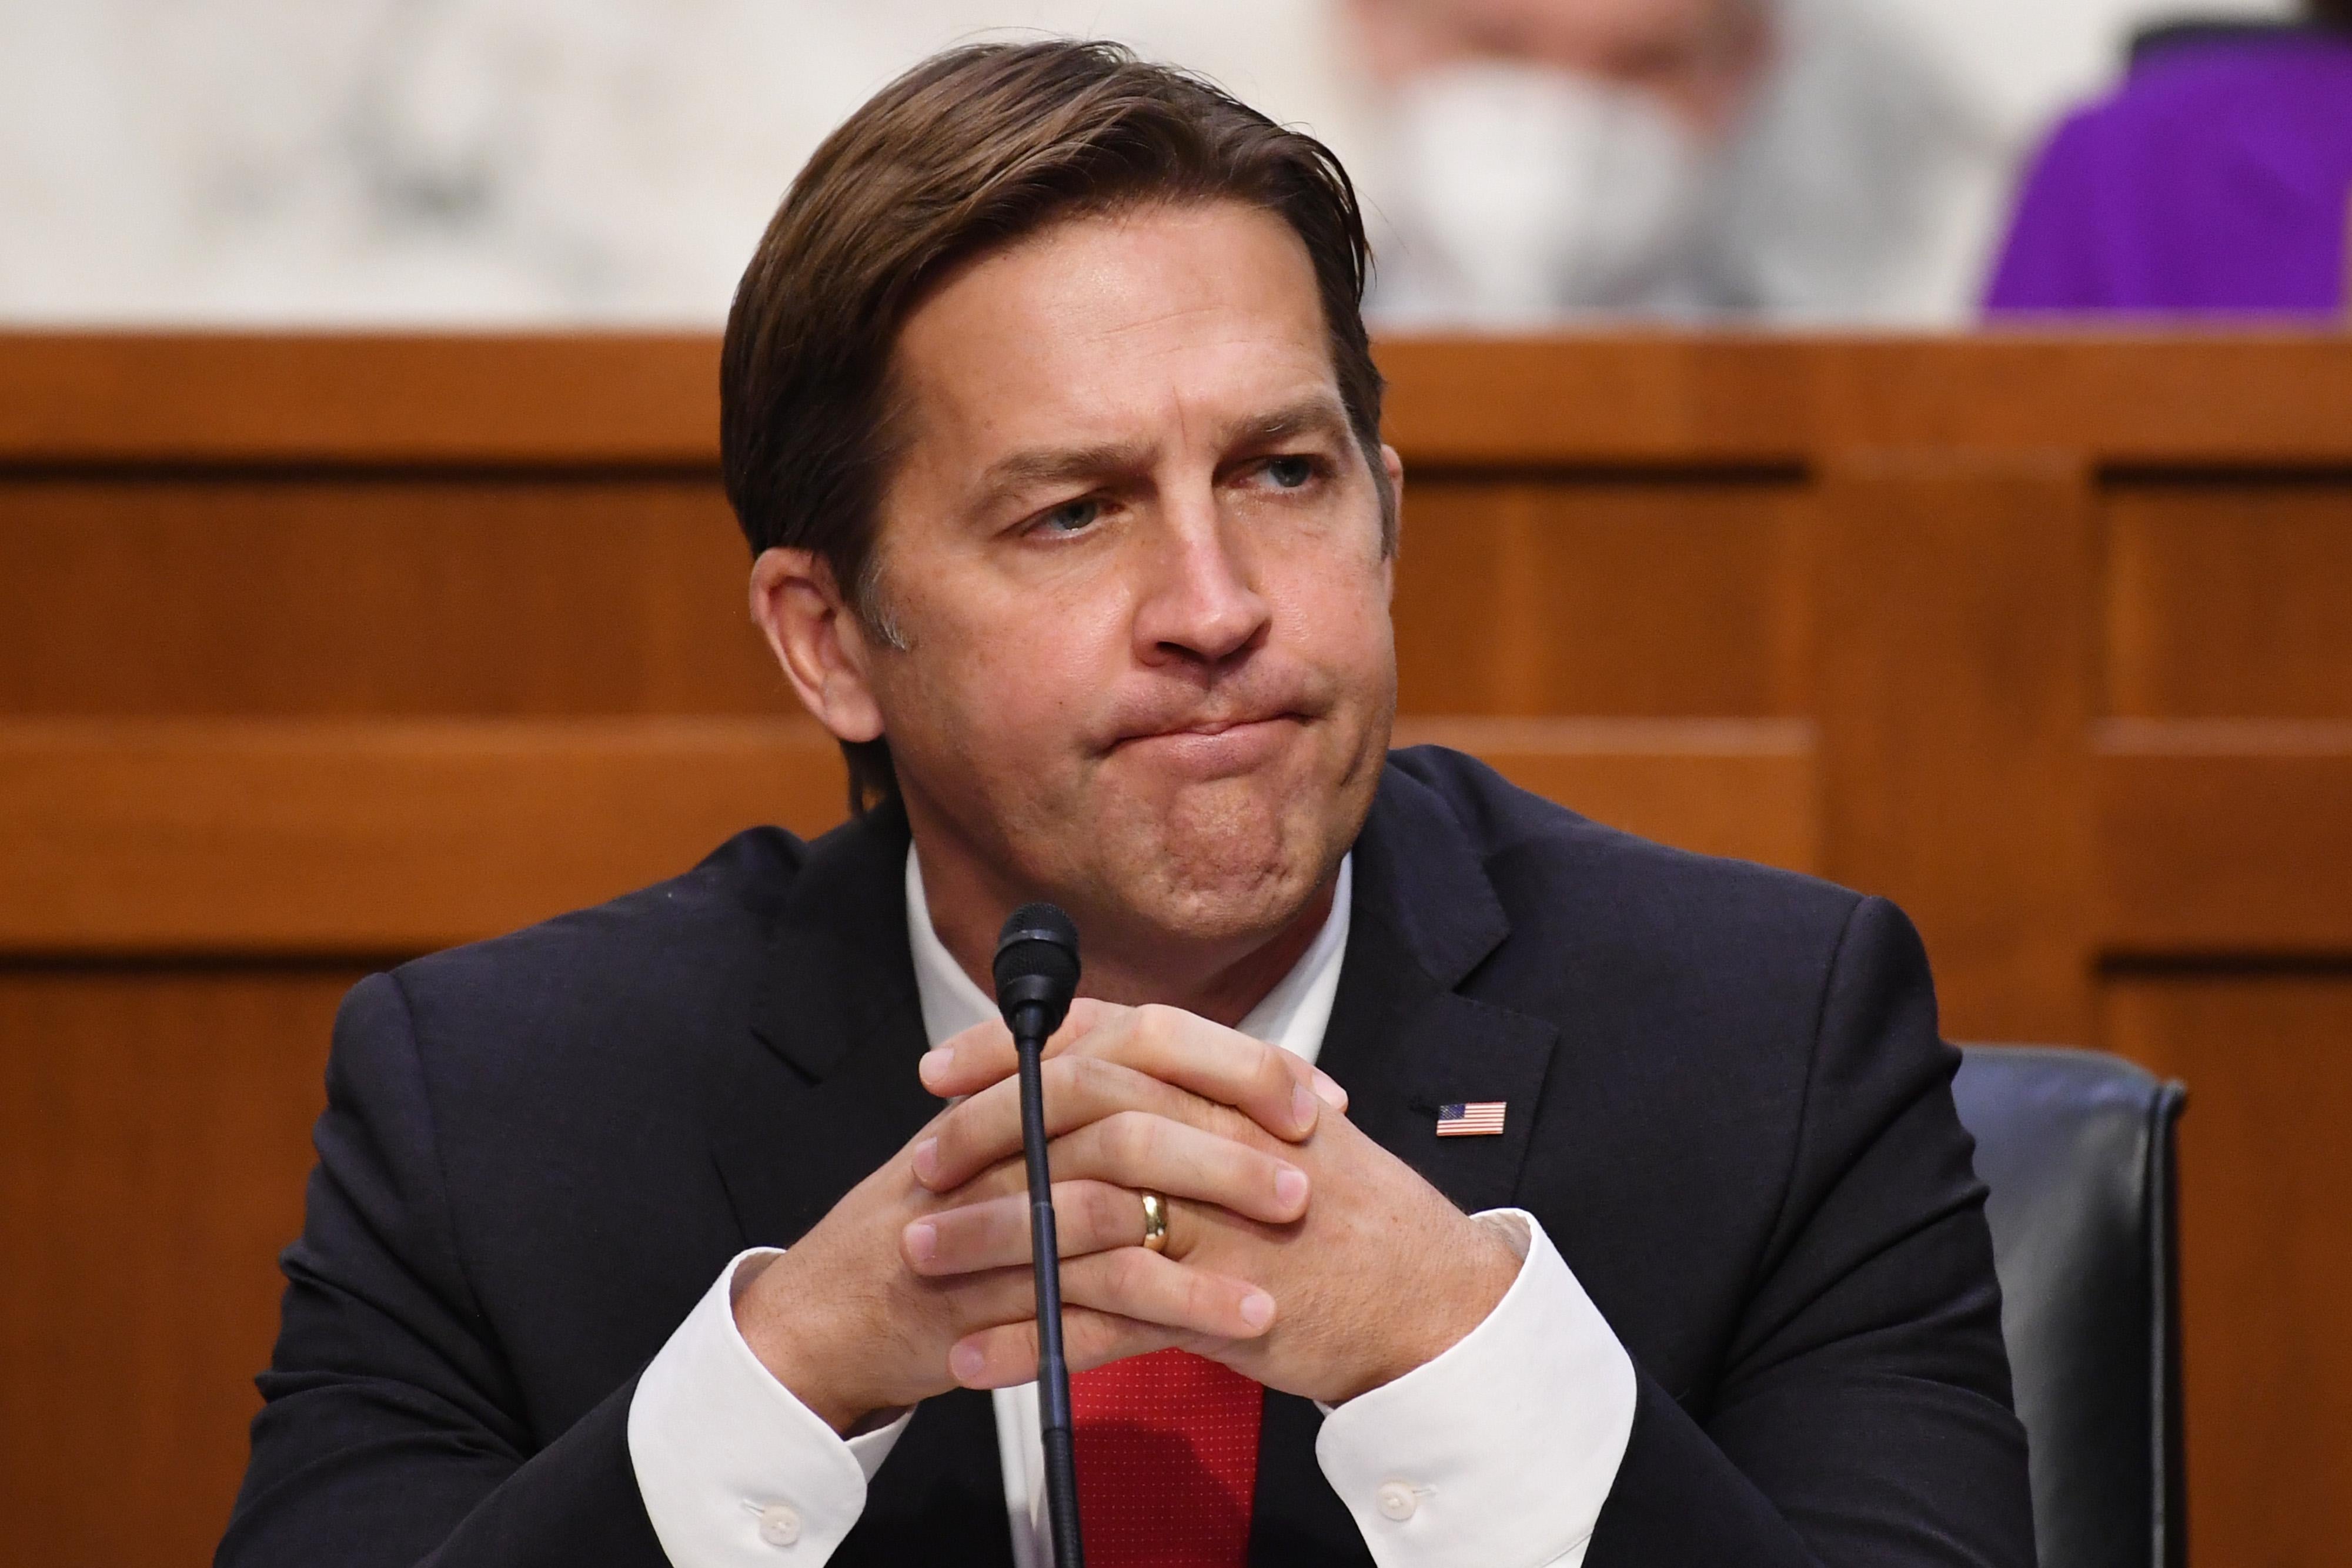 Ben Sasse purses his lips and holds his hands together.